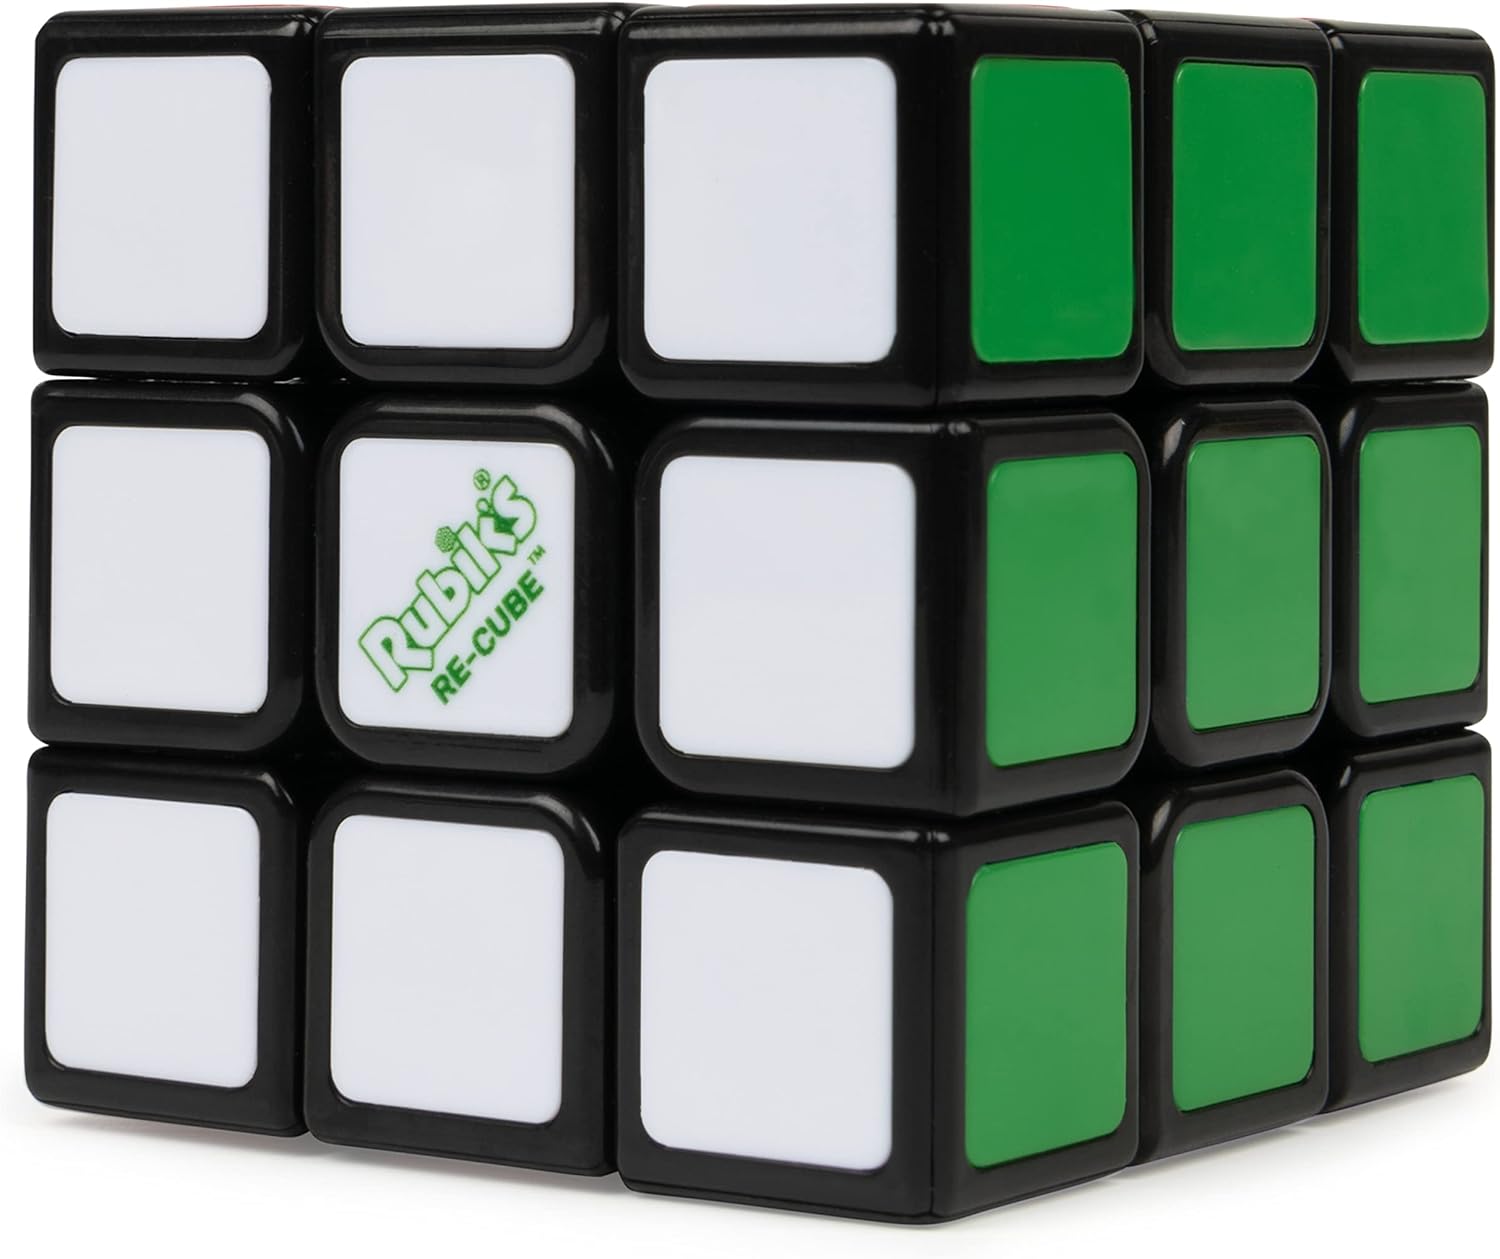 3x3 Rubik's Re-Cube $5.10 + Free Shipping w/ Prime or on orders over $35